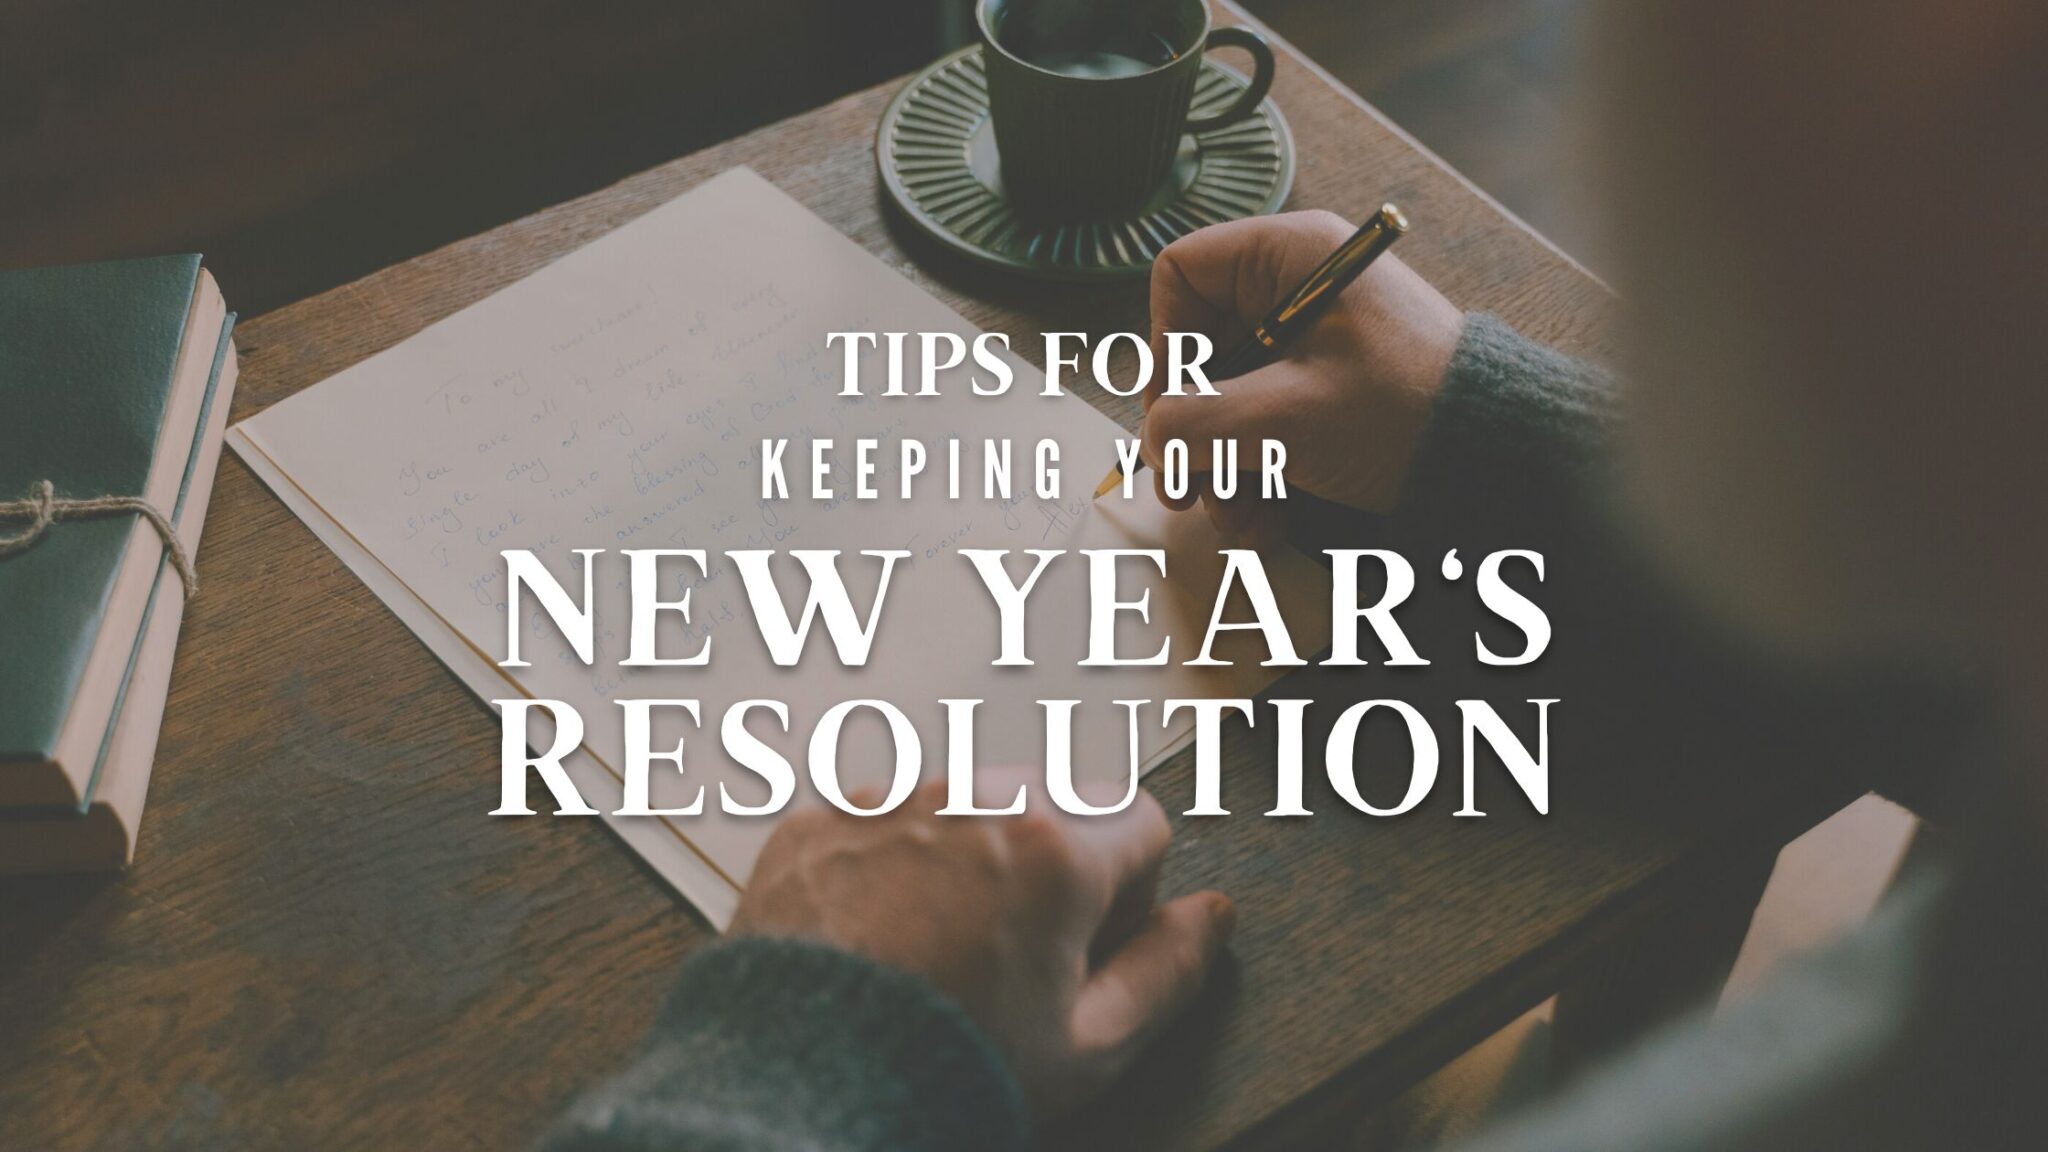 4 Tips for Keeping Your New Year's Resolution